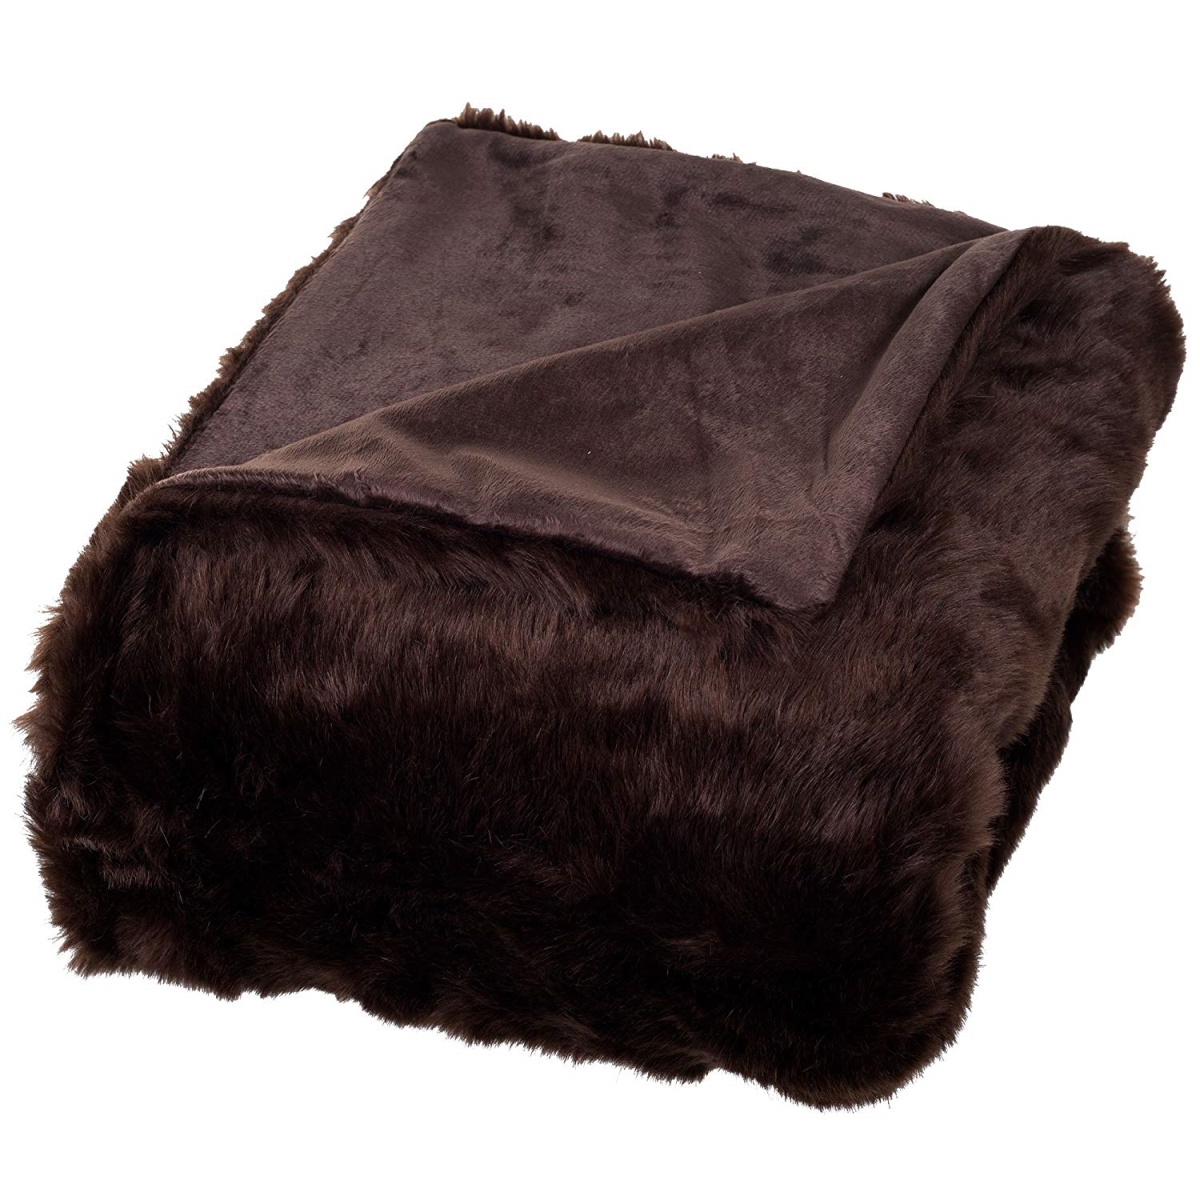 61a-26652 Luxury Long Haired Faux Fur Throw Blanket, Brown